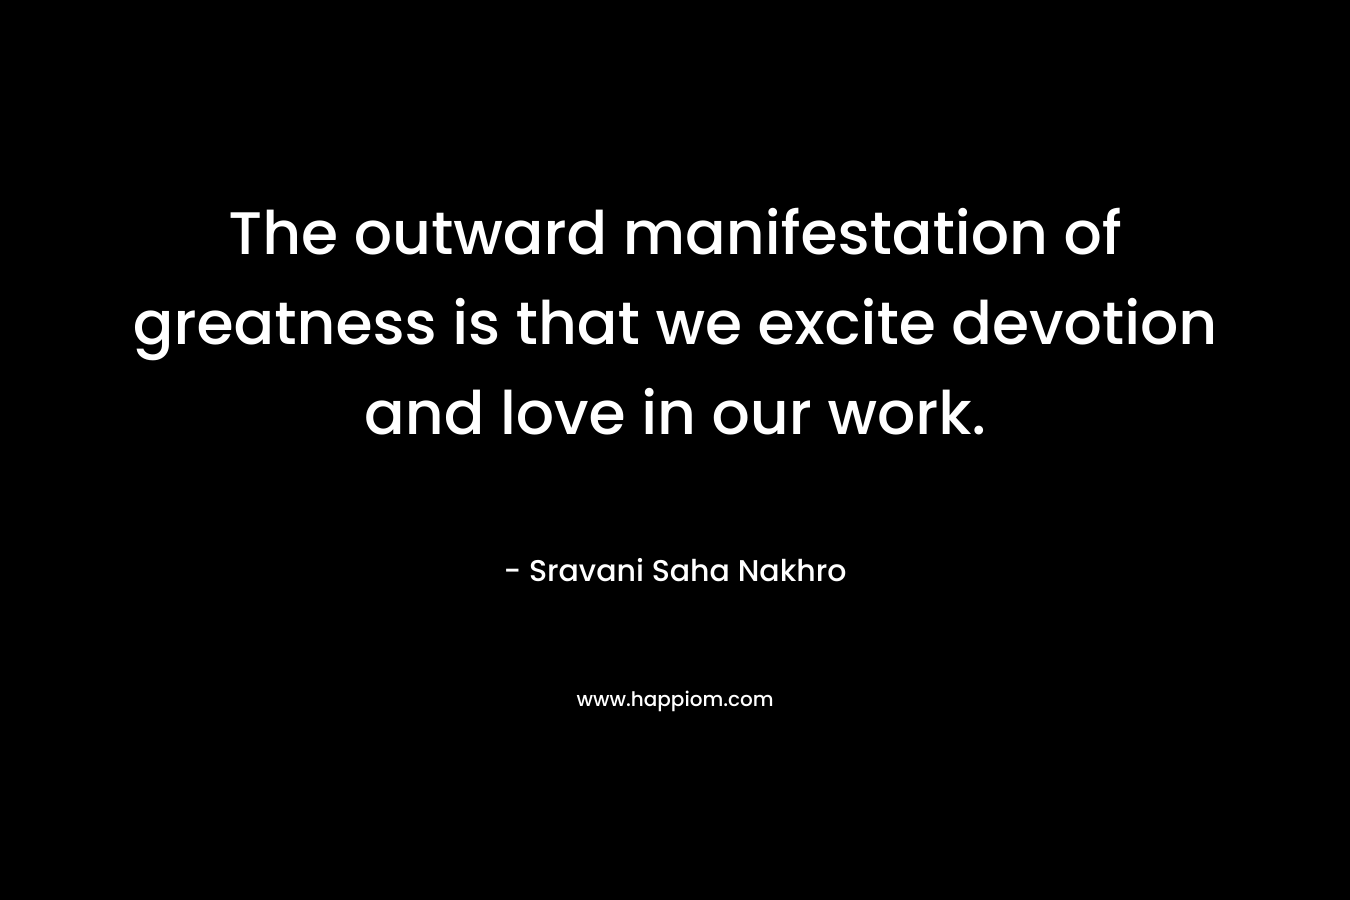 The outward manifestation of greatness is that we excite devotion and love in our work.